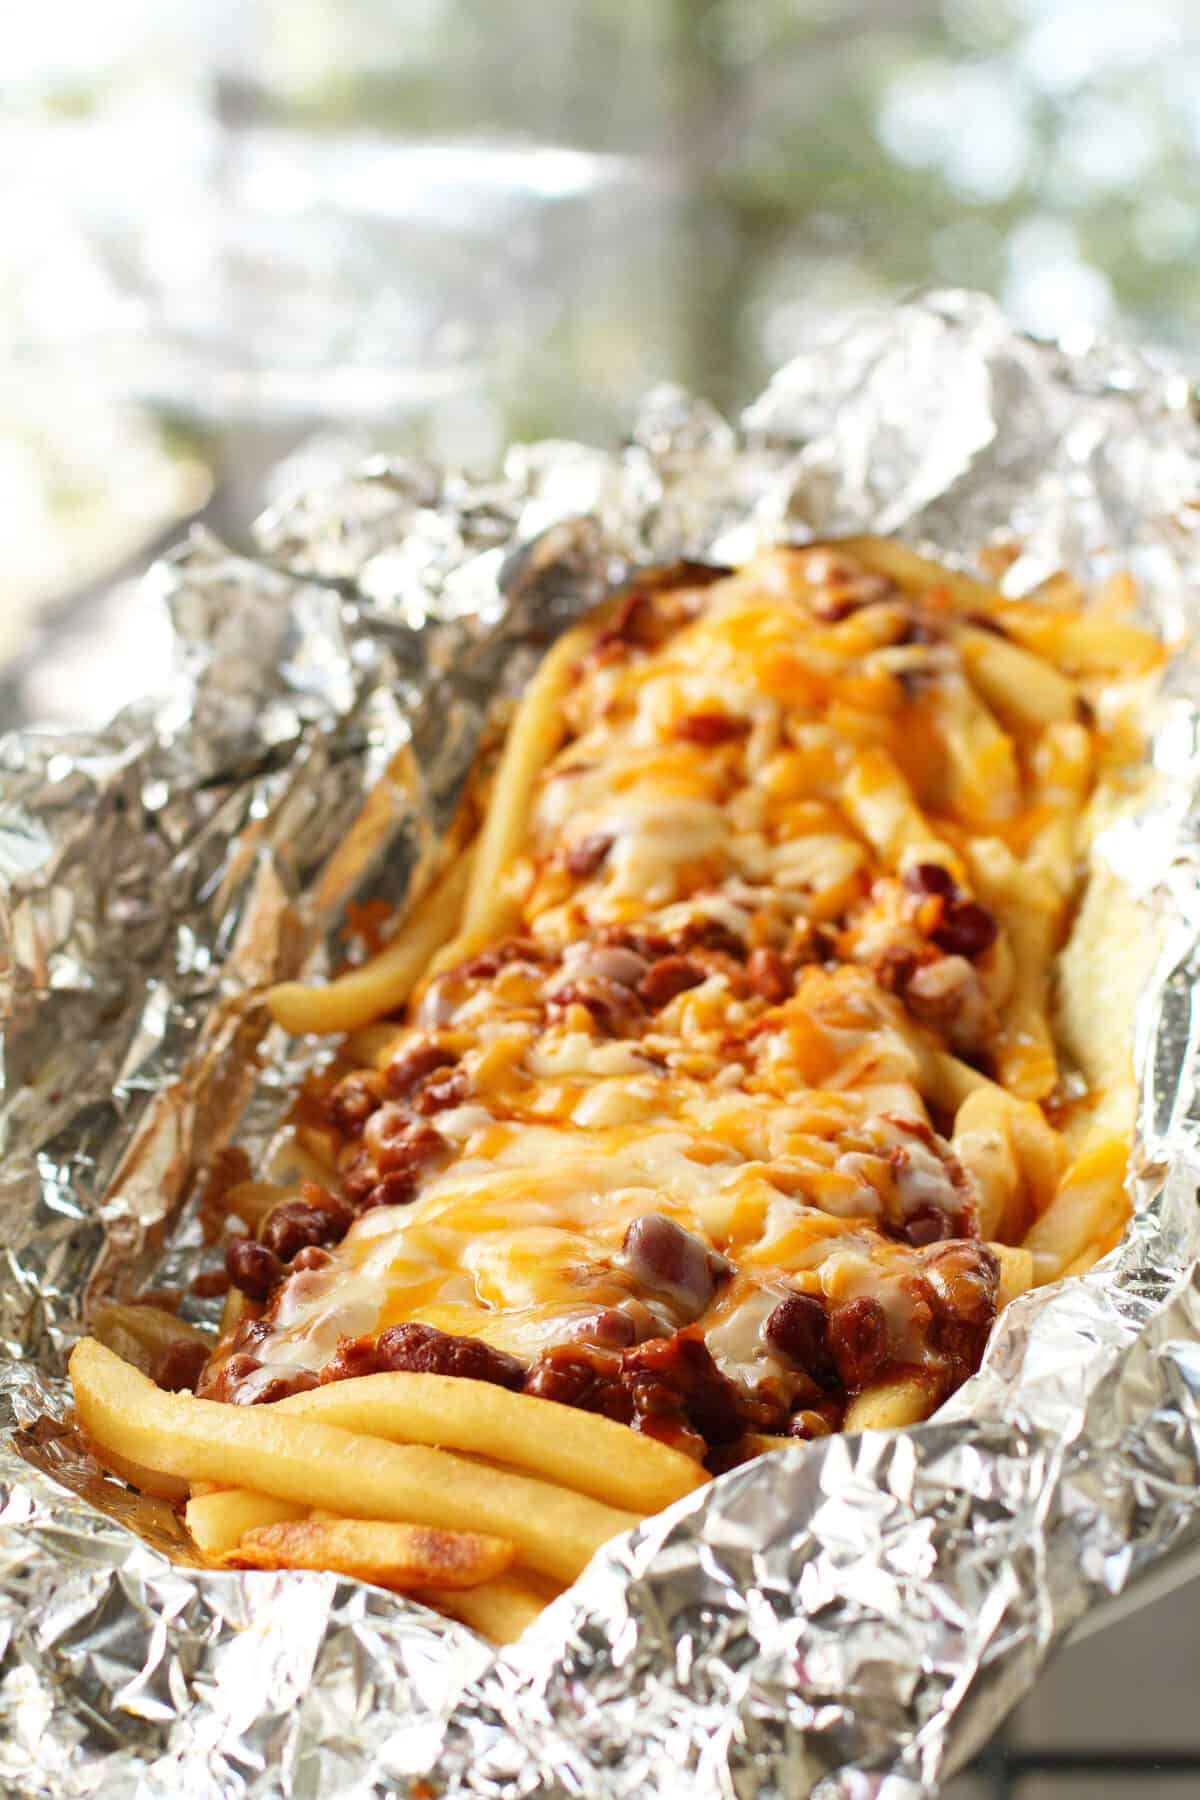 chili cheese fries in an aluminum foil packet